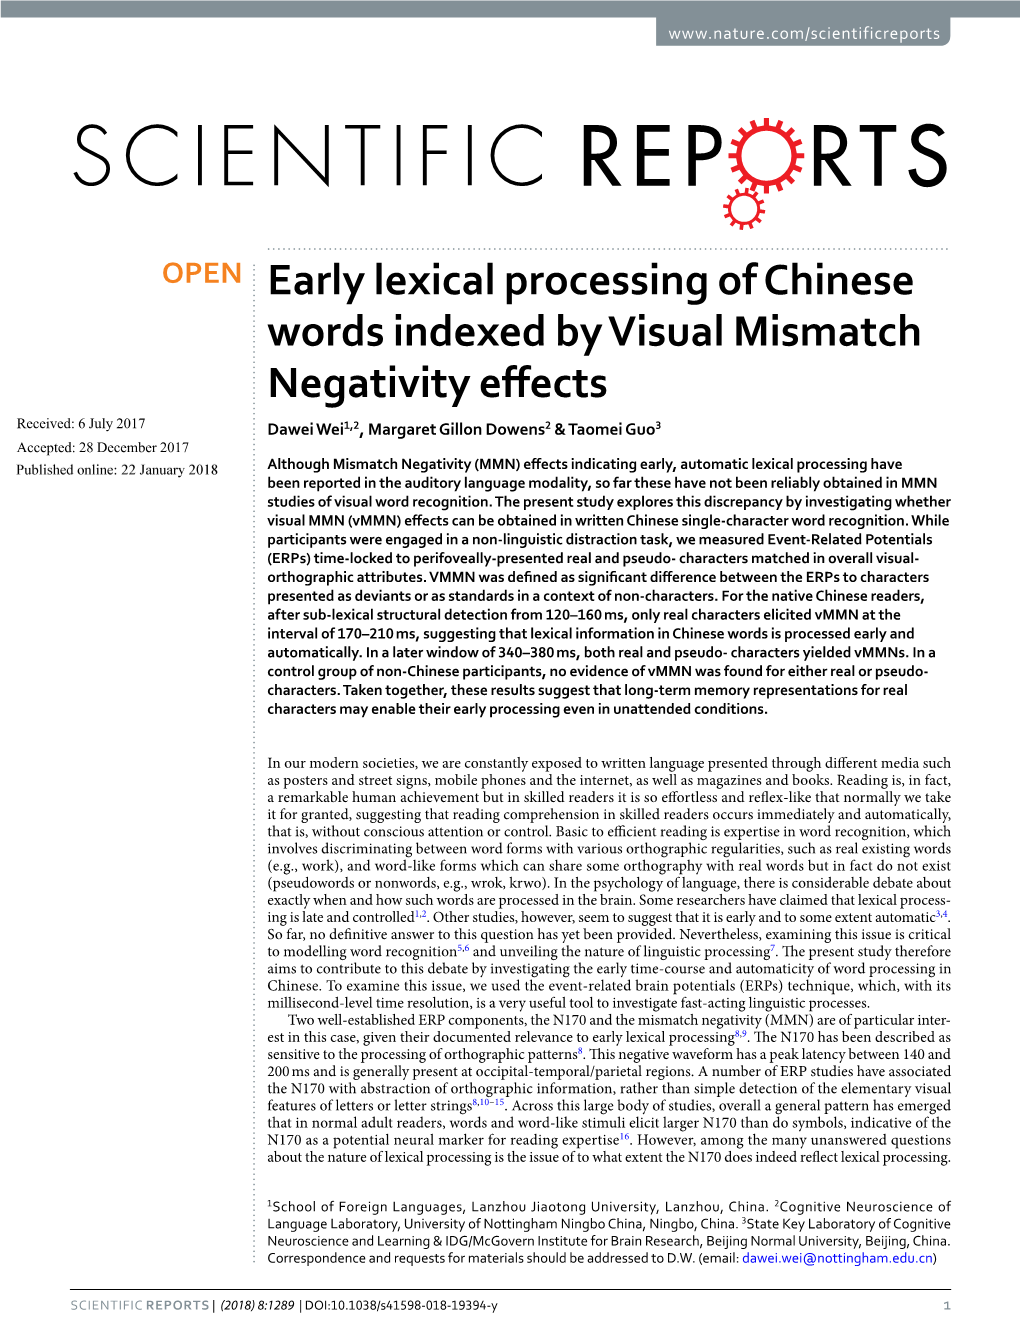 Early Lexical Processing of Chinese Words Indexed by Visual Mismatch